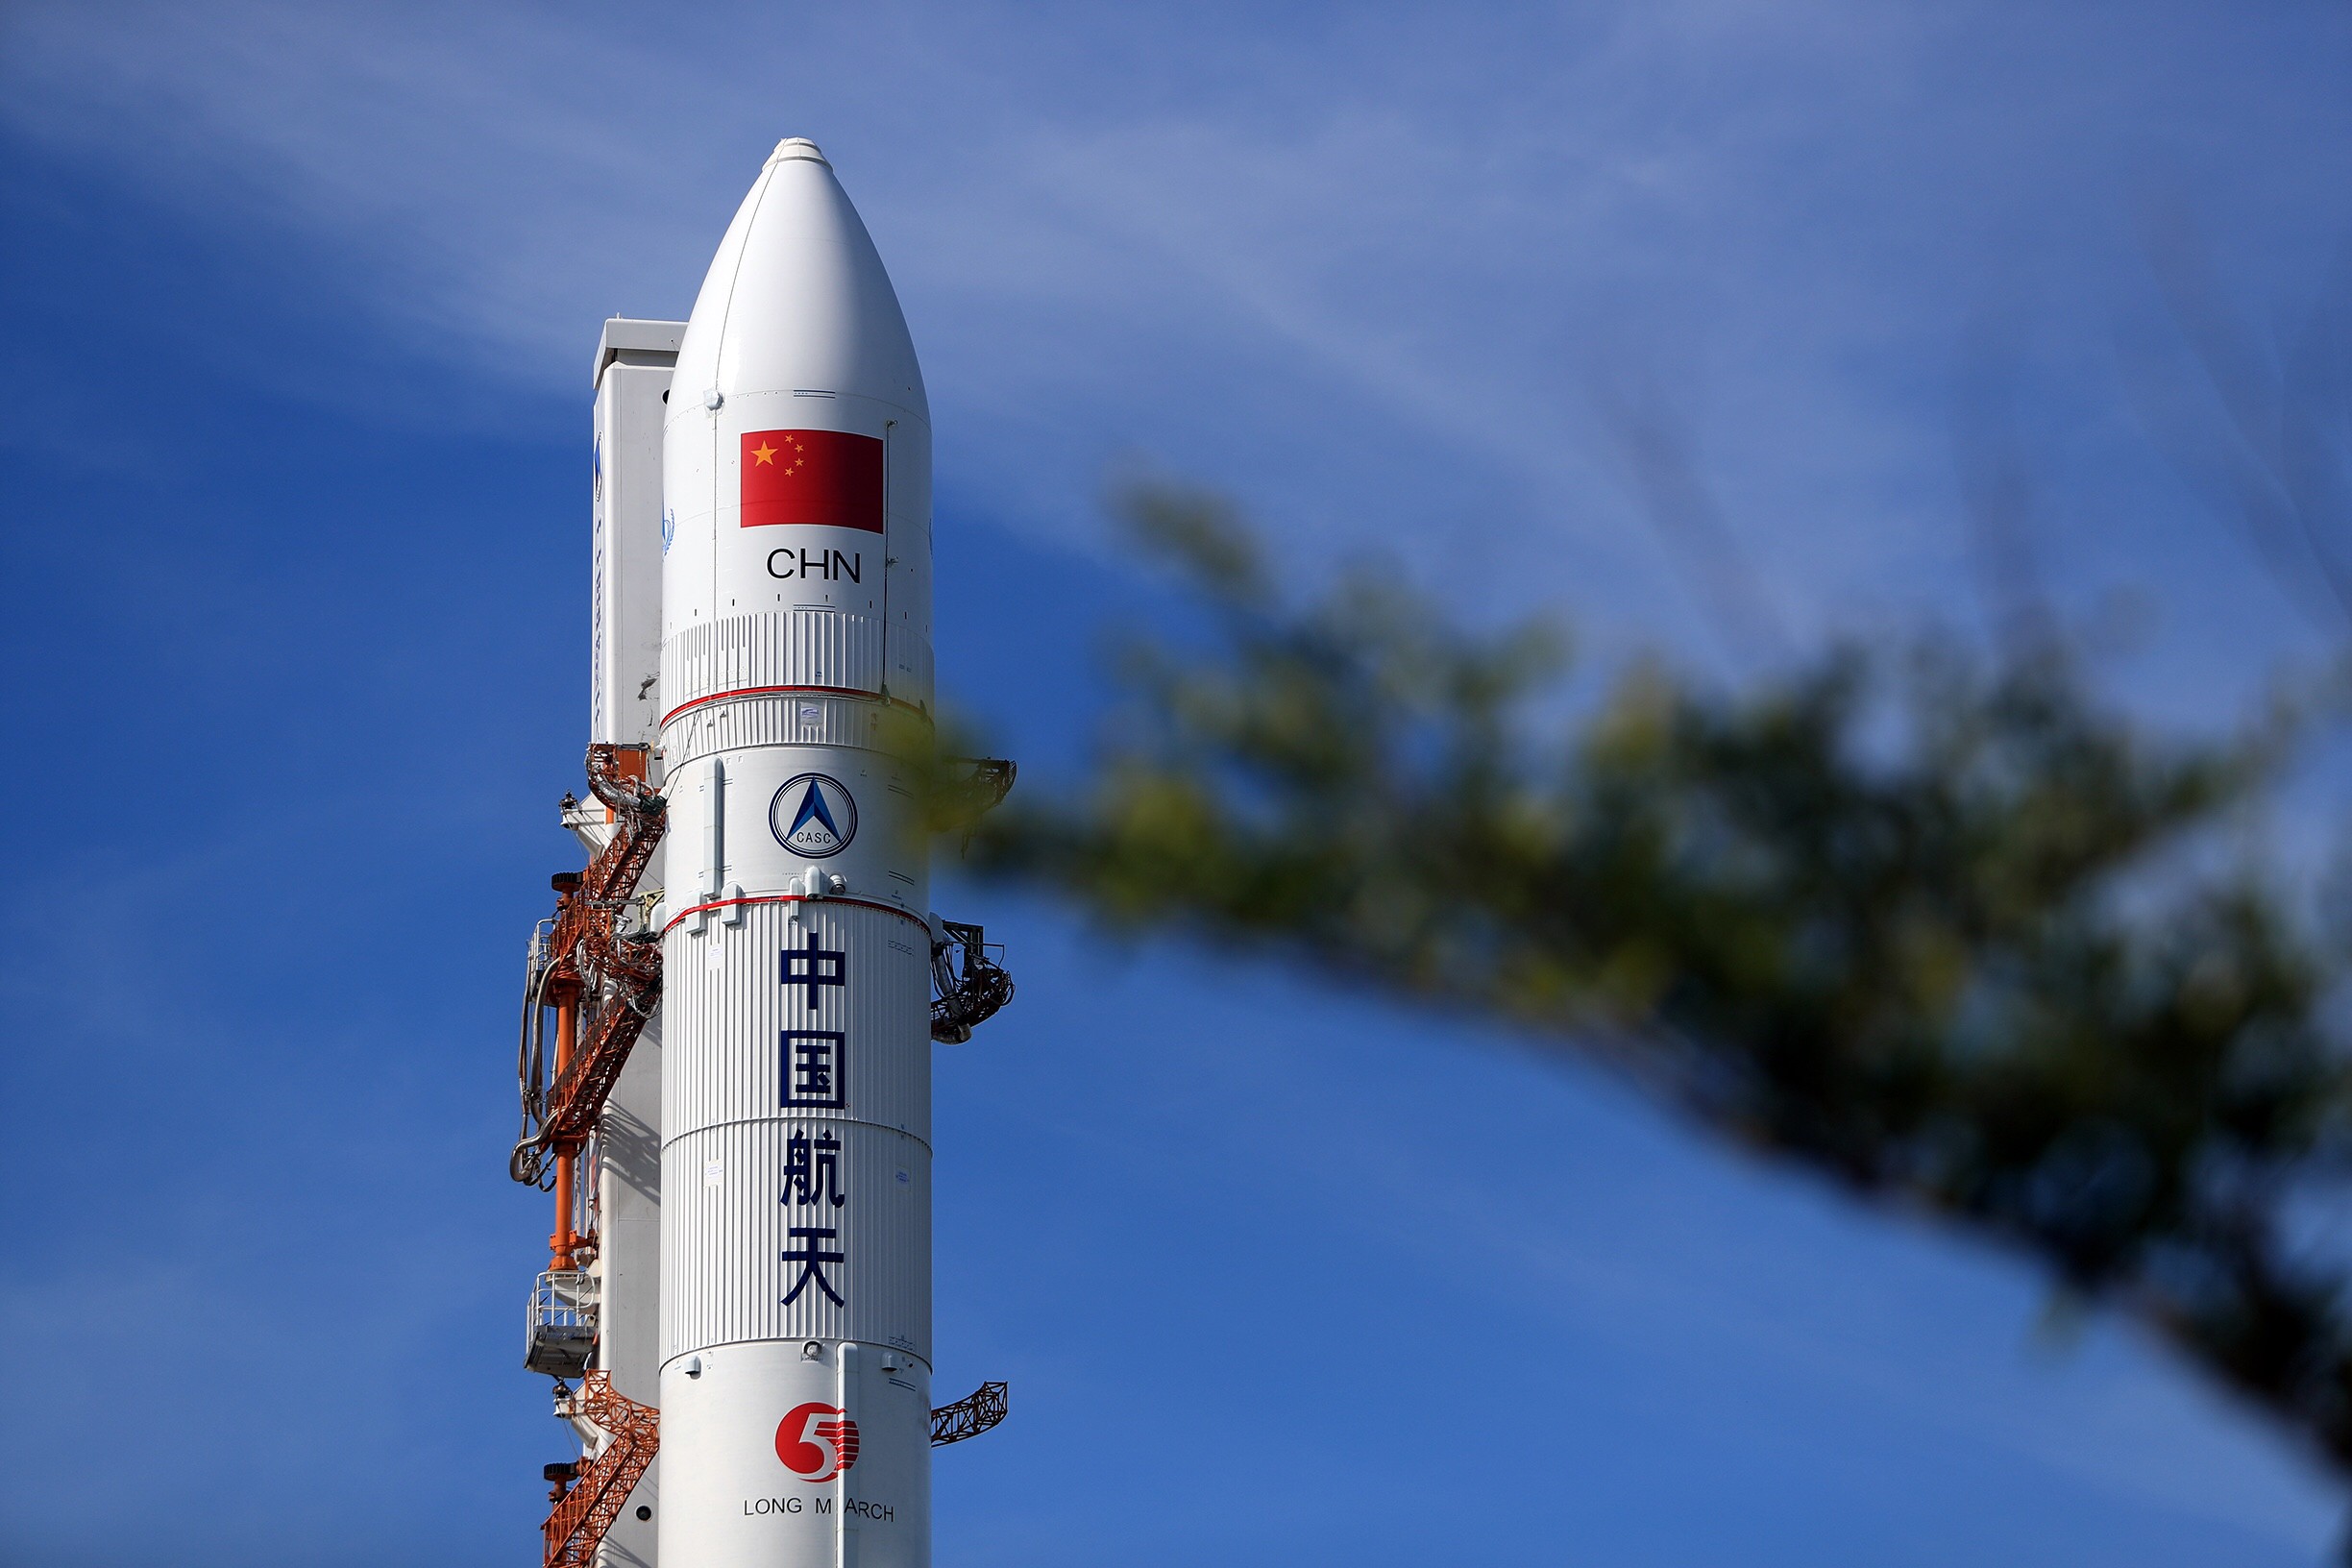 The Long March-5 Y2 carrier rocket, seen at the Wenchang Space Launch Centre in Hainan province in June, was set to carry a communication satellite into space. China sees space warfare as its best chance to directly compete with the US militarily. Photo: Xinhua